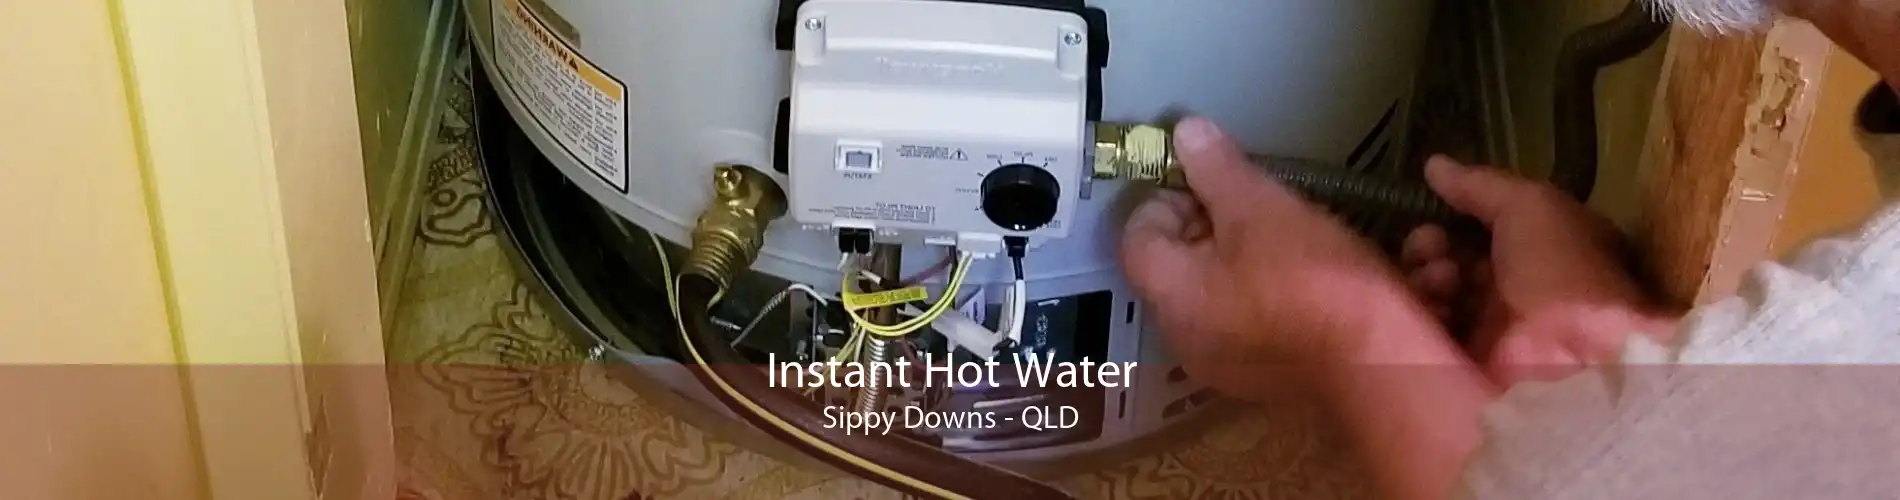 Instant Hot Water Sippy Downs - QLD